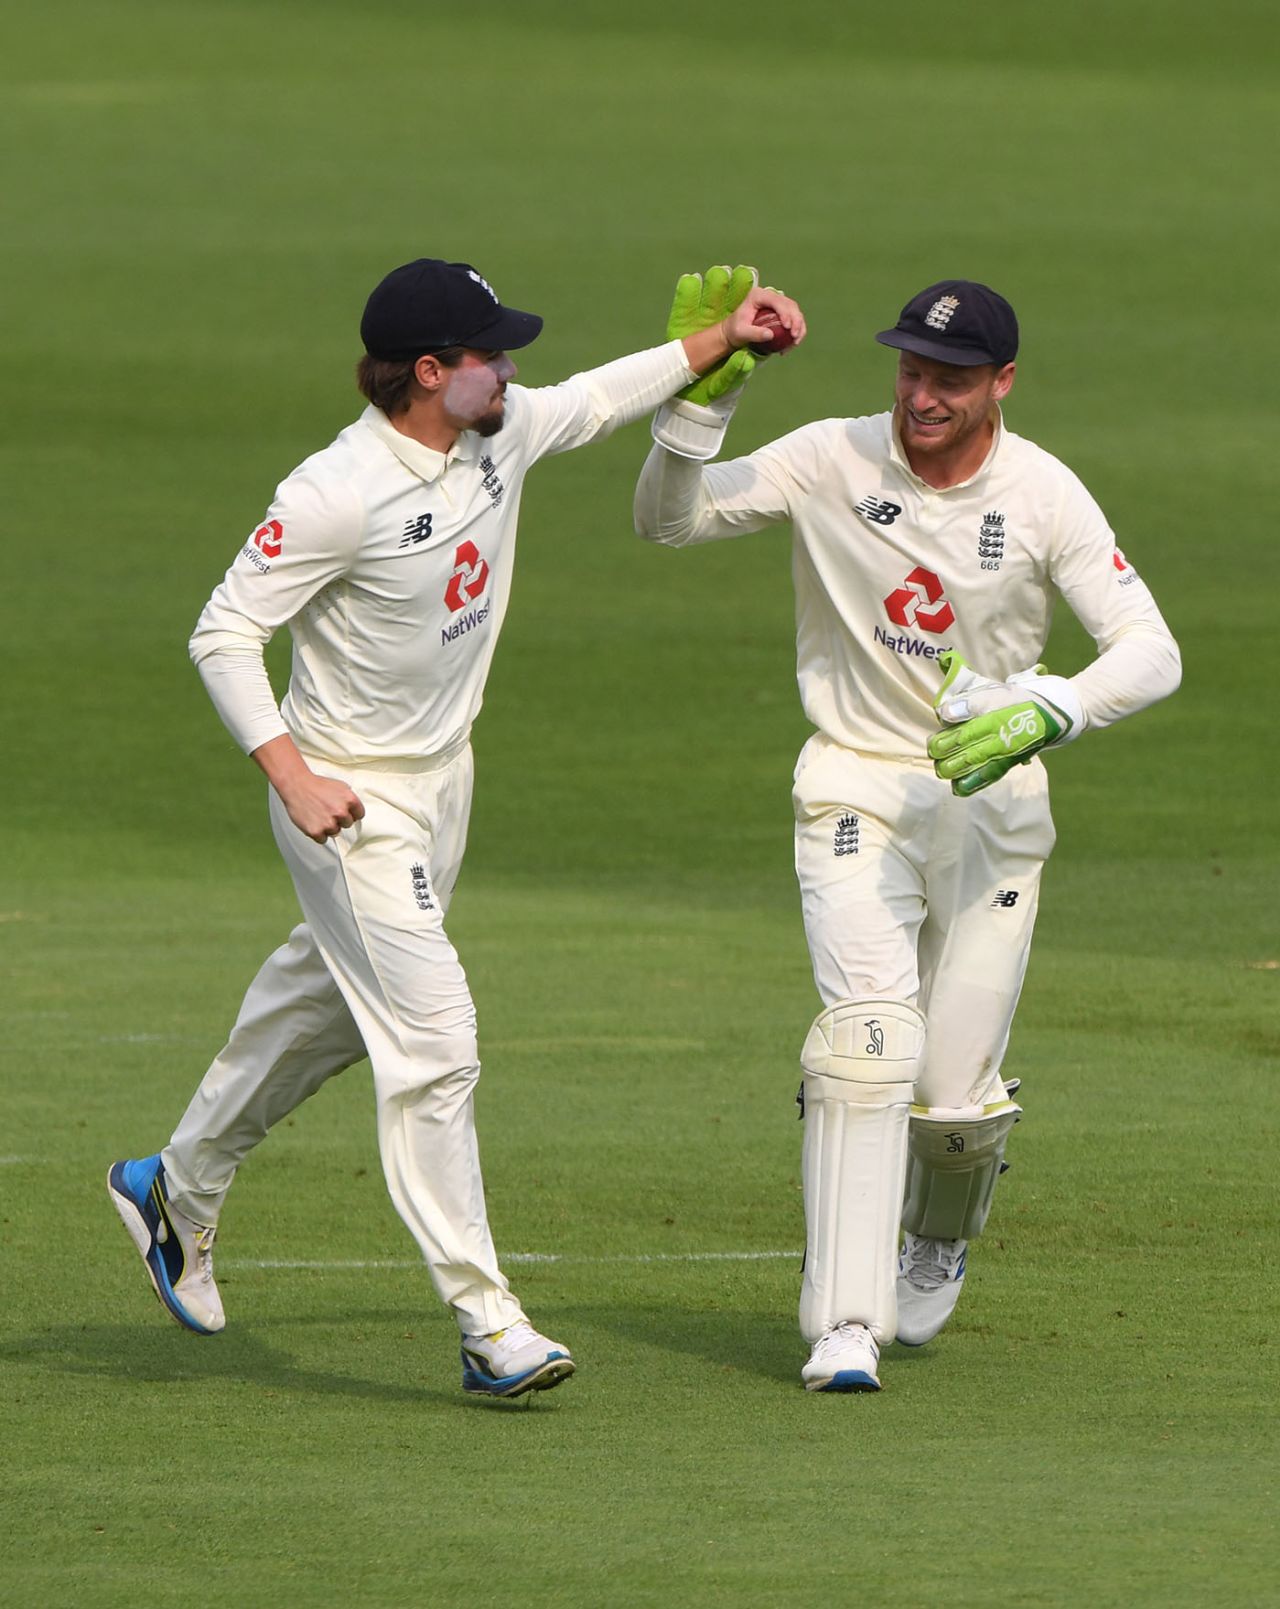 Rory Burns and Jos Buttler celebrate the wicket of Abid Ali, England v Pakistan, Ageas Bowl, 2nd Test, 1st day, August 13, 2020